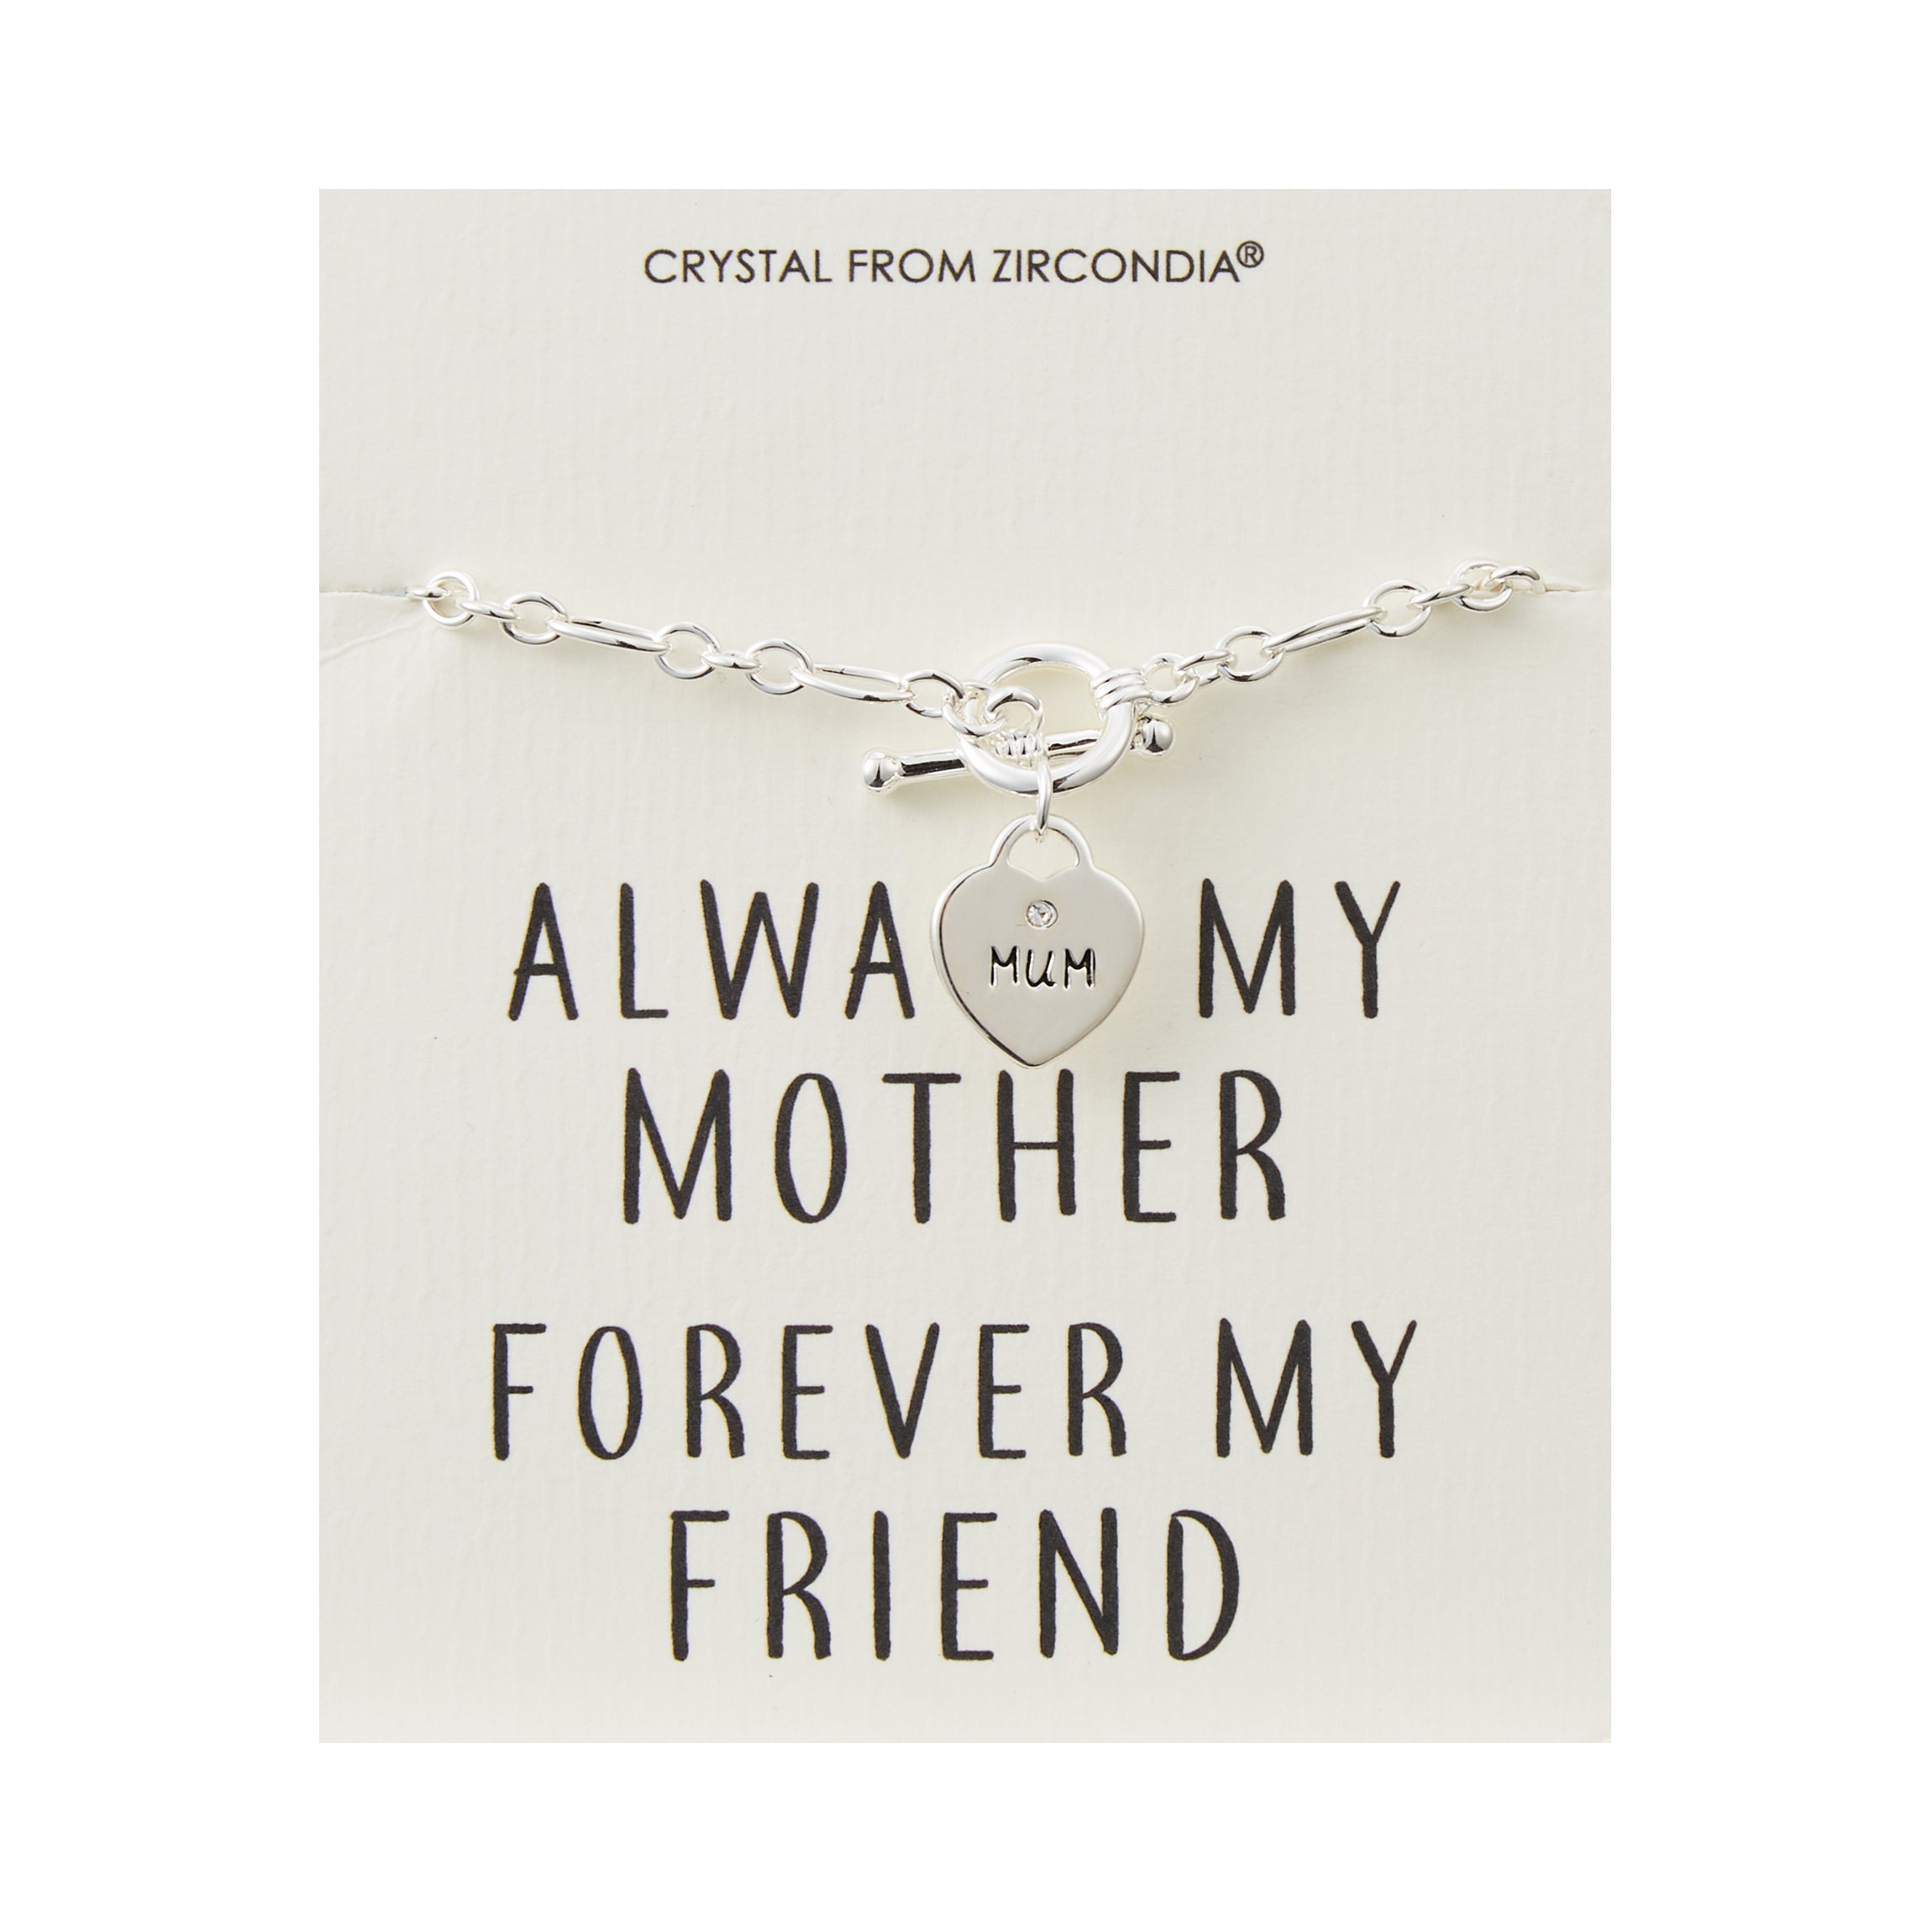 Mum Charm Bracelet with Quote Card Created with Zircondia® Crystals